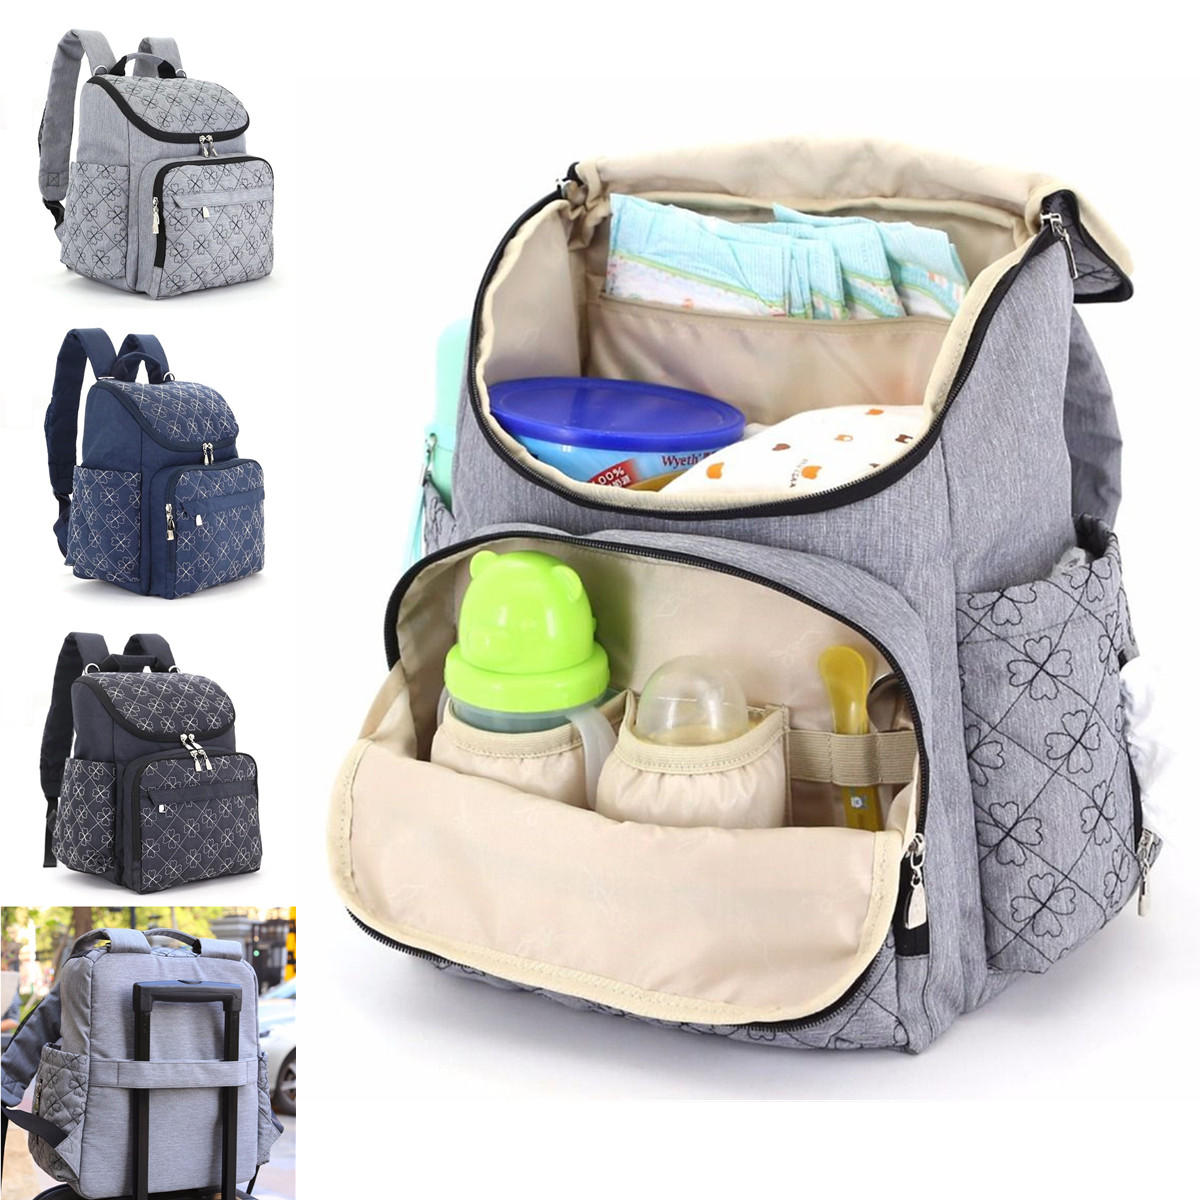 IPRee™ Travel Backpack Mummy Maternity Baby Diaper Bag Nappy Organizer Nursing Pouch